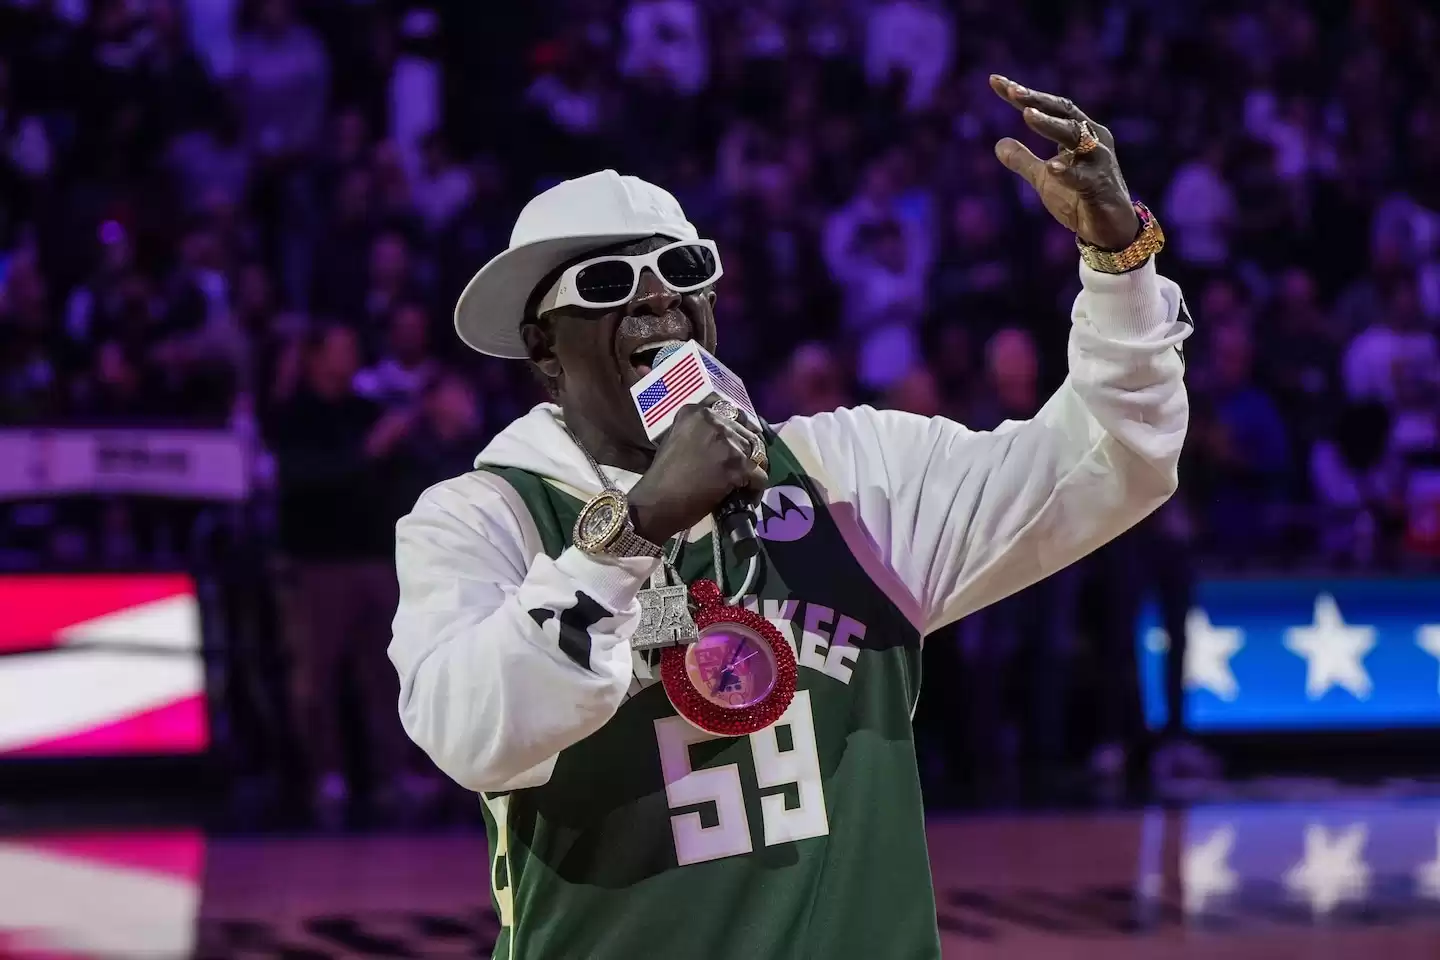 Flavor Flav to Perform National Anthem Again